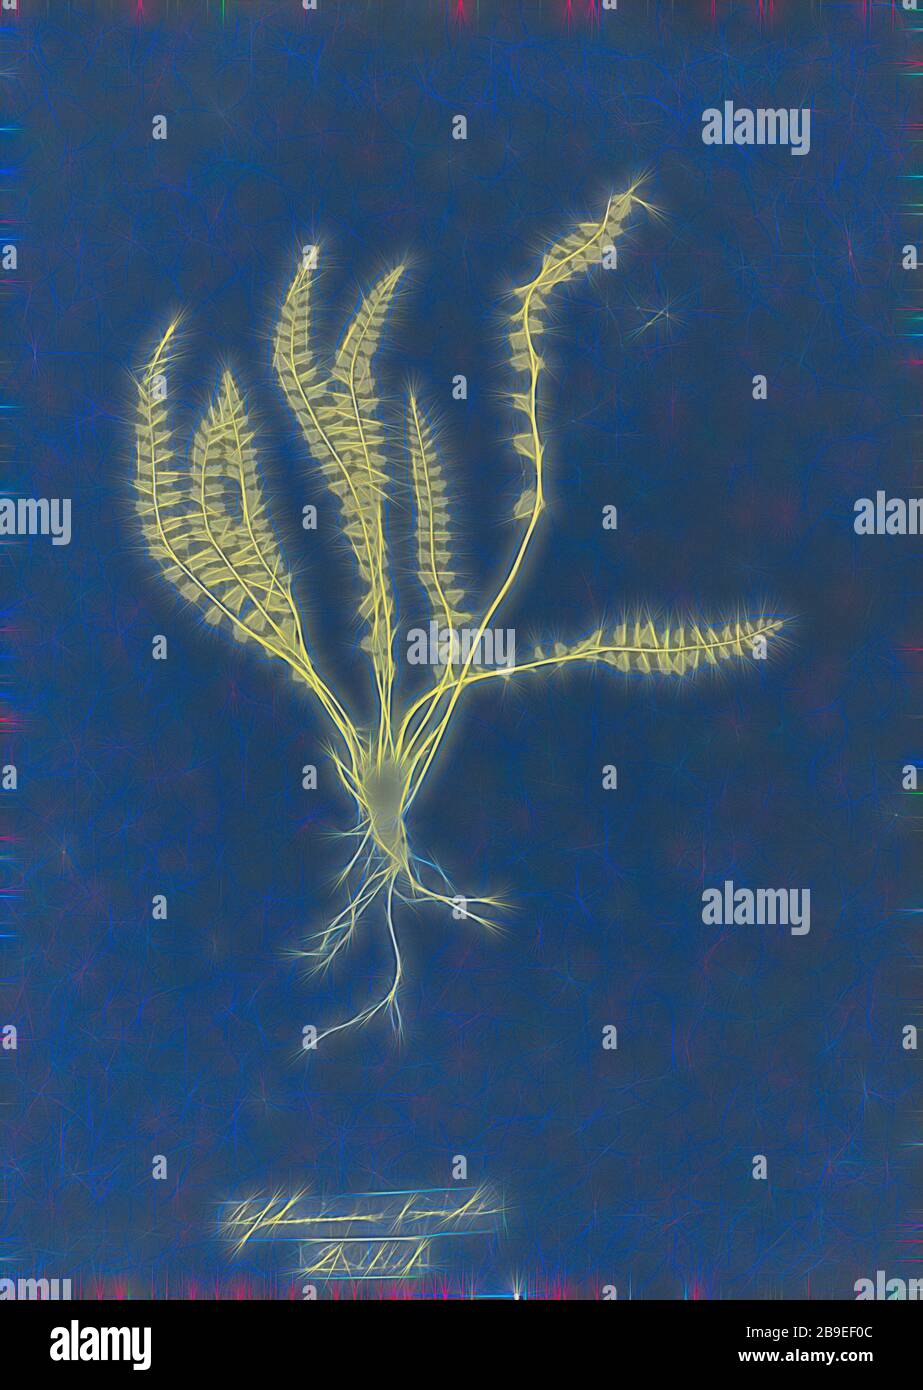 Asplenium viride, British, Anna Atkins (British, 1799 - 1871), England, 1853, Cyanotype, 25.4 × 19.4 cm (10 × 7 5,8 in, Reimagined by Gibon, design of warm cheerful glowing of brightness and light rays radiance. Classic art reinvented with a modern twist. Photography inspired by futurism, embracing dynamic energy of modern technology, movement, speed and revolutionize culture. Stock Photo